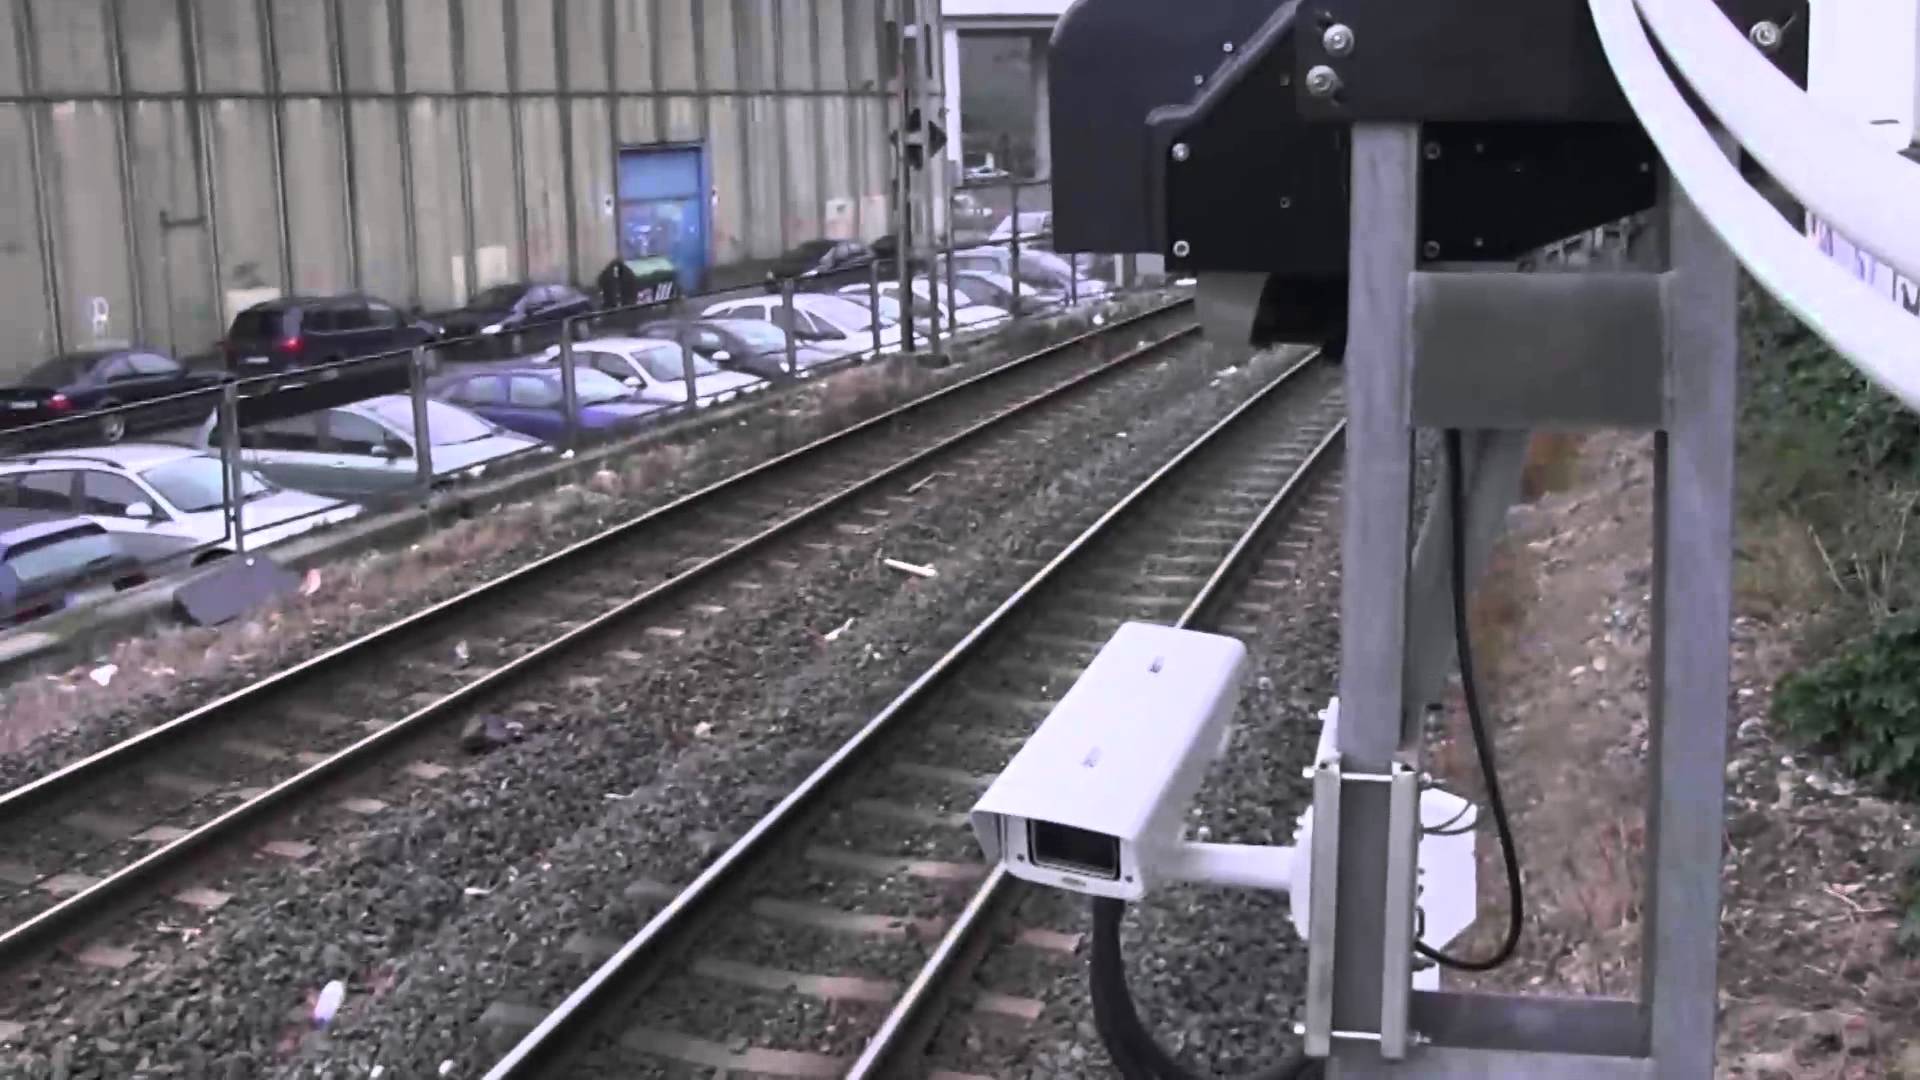 Obstacle detection system on railway tracks - YouTube